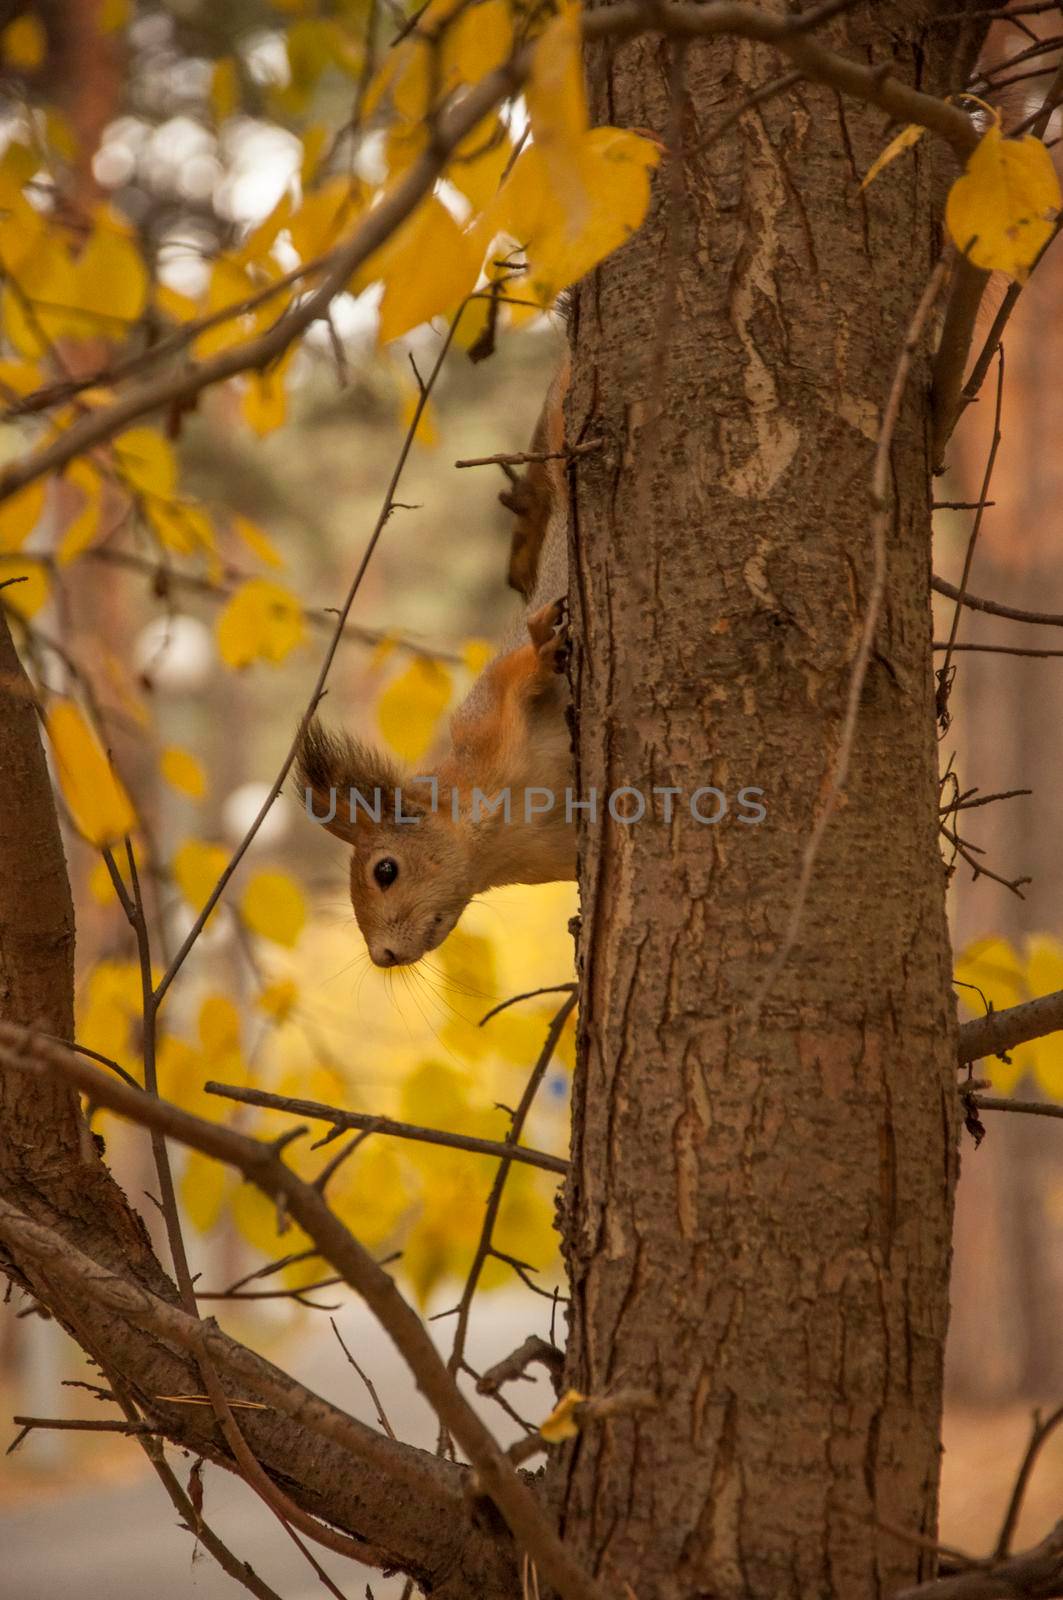 red squirrel in the autumn forest by inxti